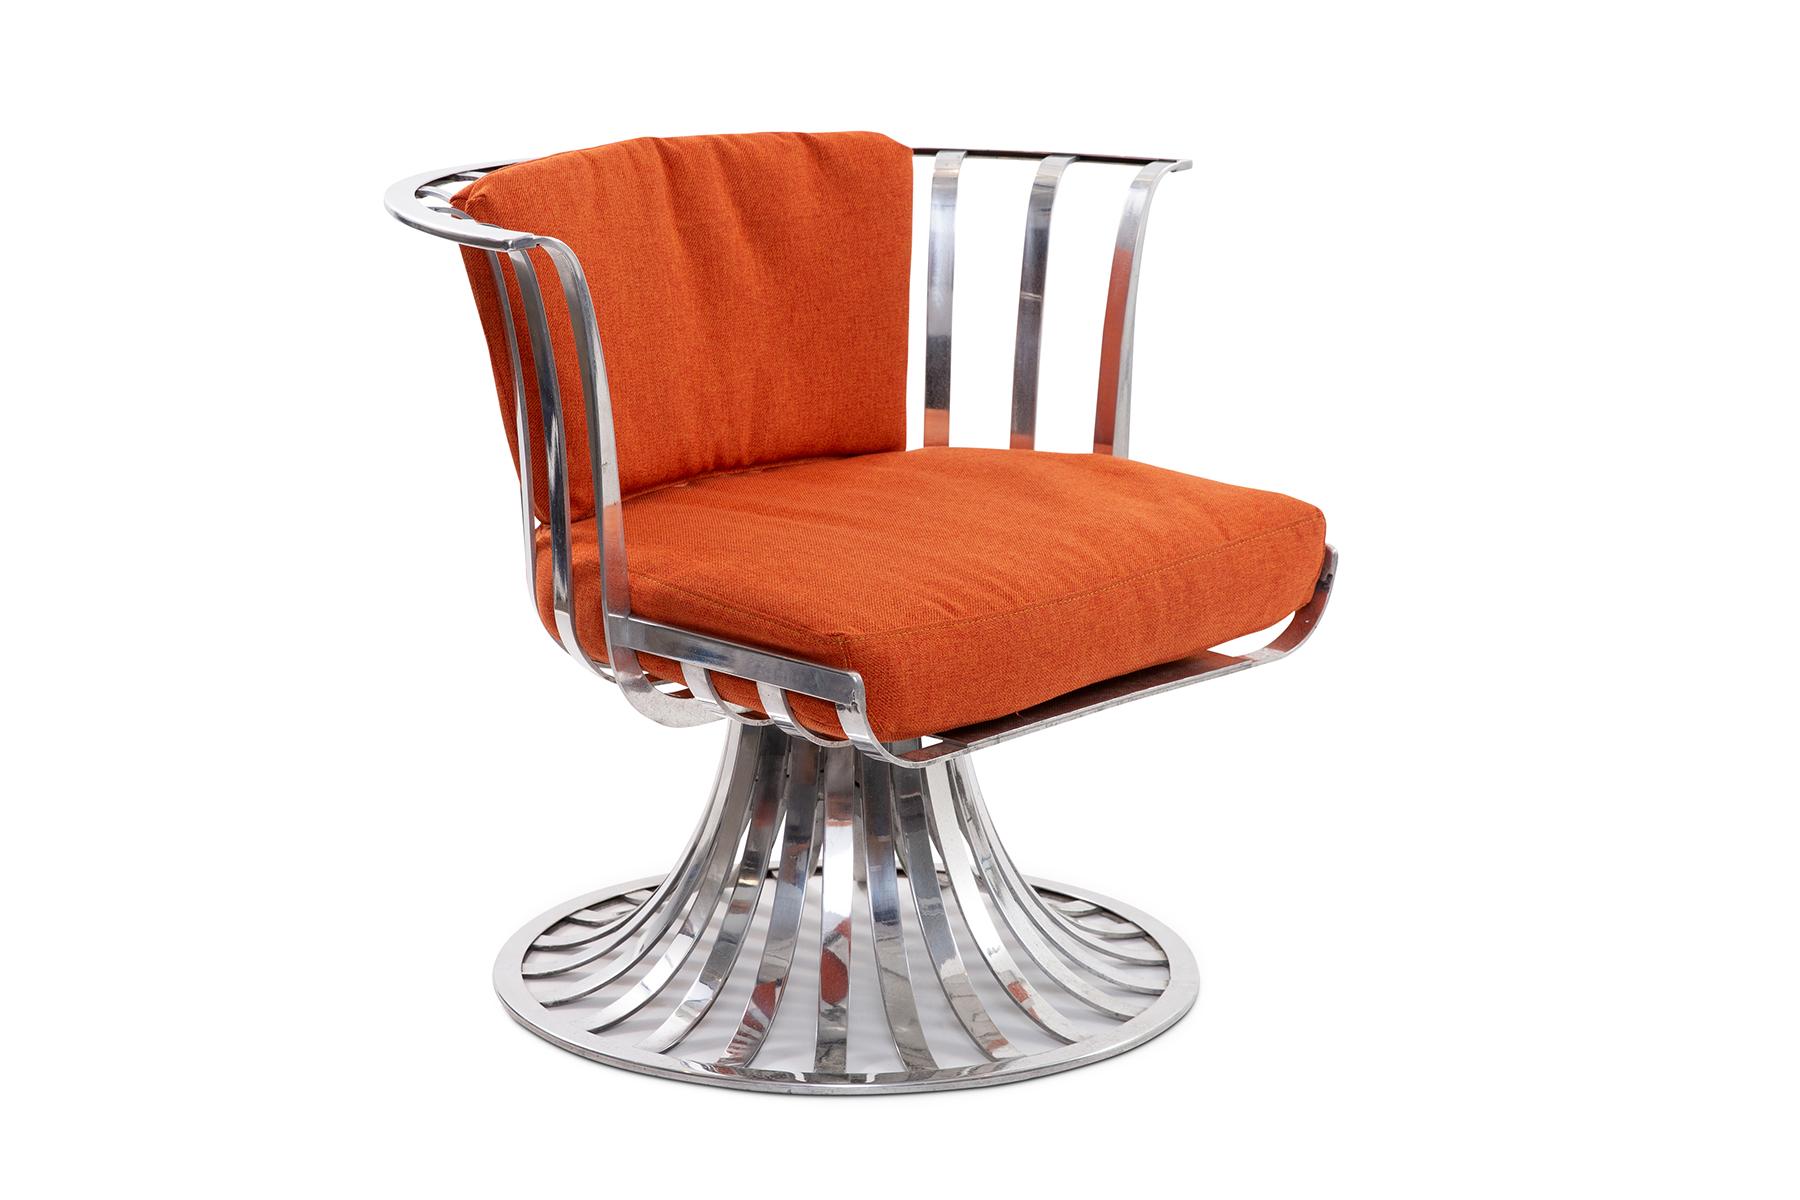 4 slatted aluminum swivel lounge chairs designed by Russell Woodard, circa early 1960s. These examples can be used indoors or out. These have been newly reupholstered in bright orange fabric. Price listed is per chair.